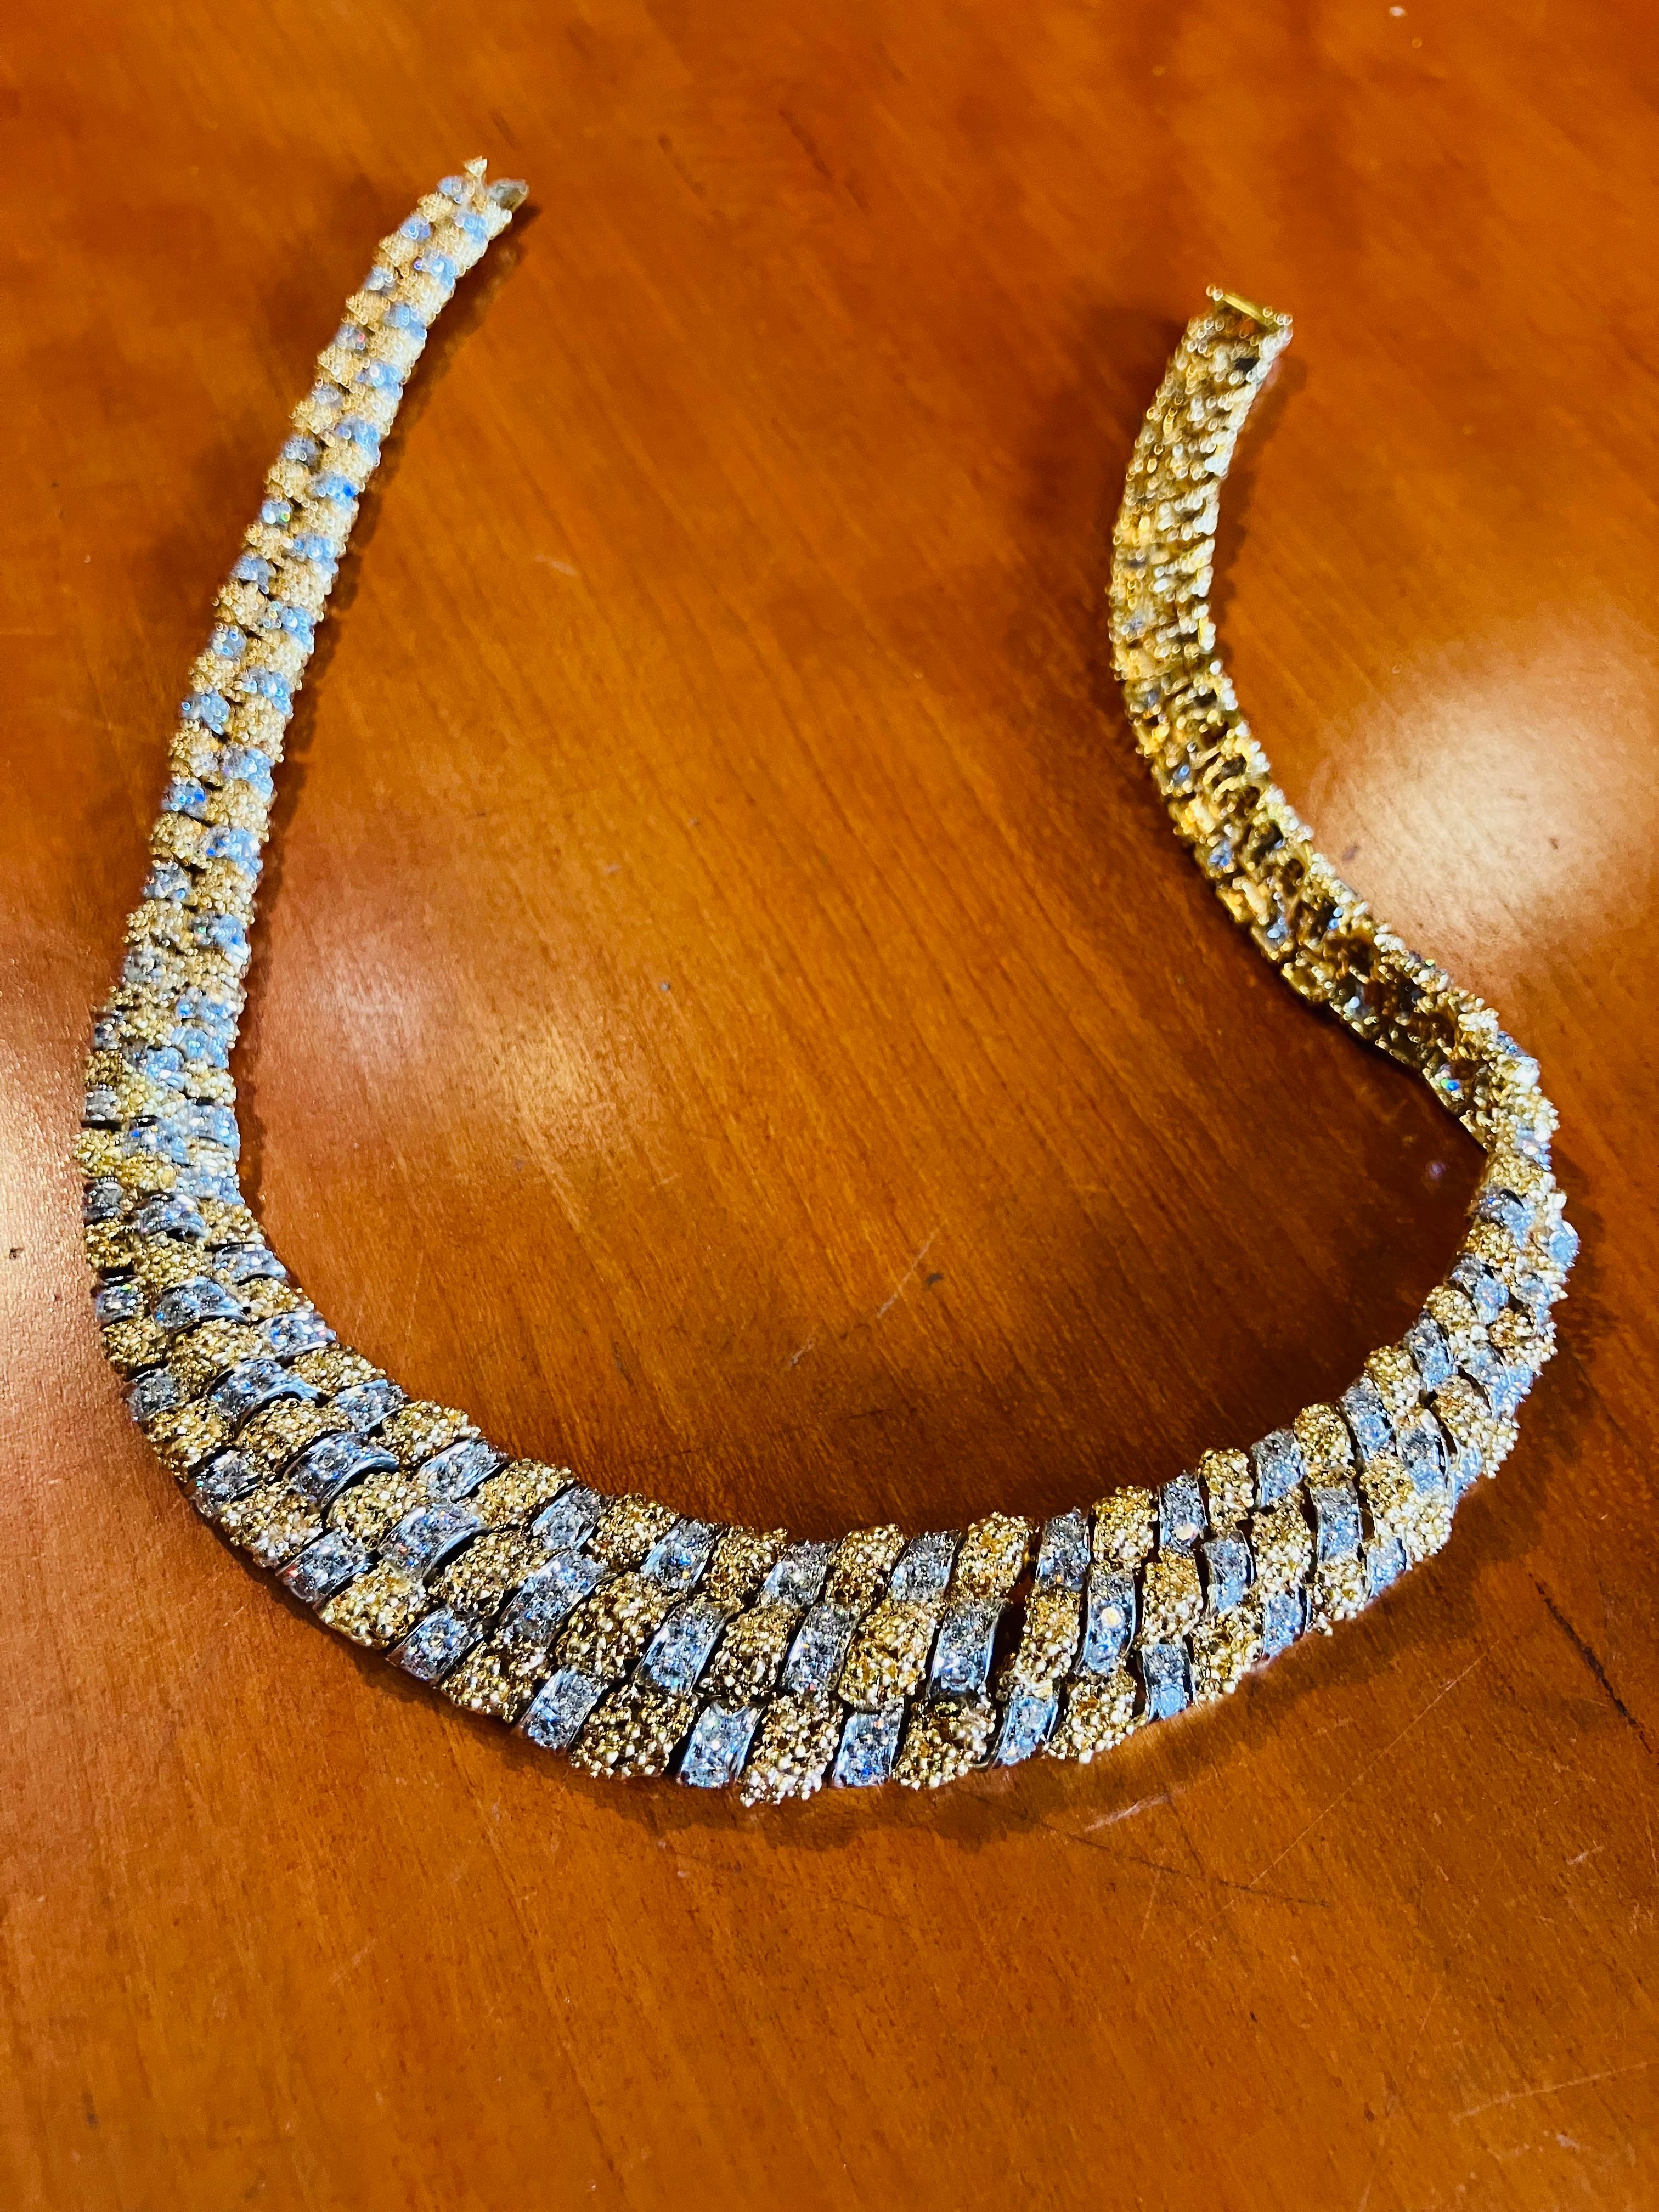 Tiffany & Co. Gold Diamond Necklace  In Excellent Condition For Sale In Palm Beach, FL